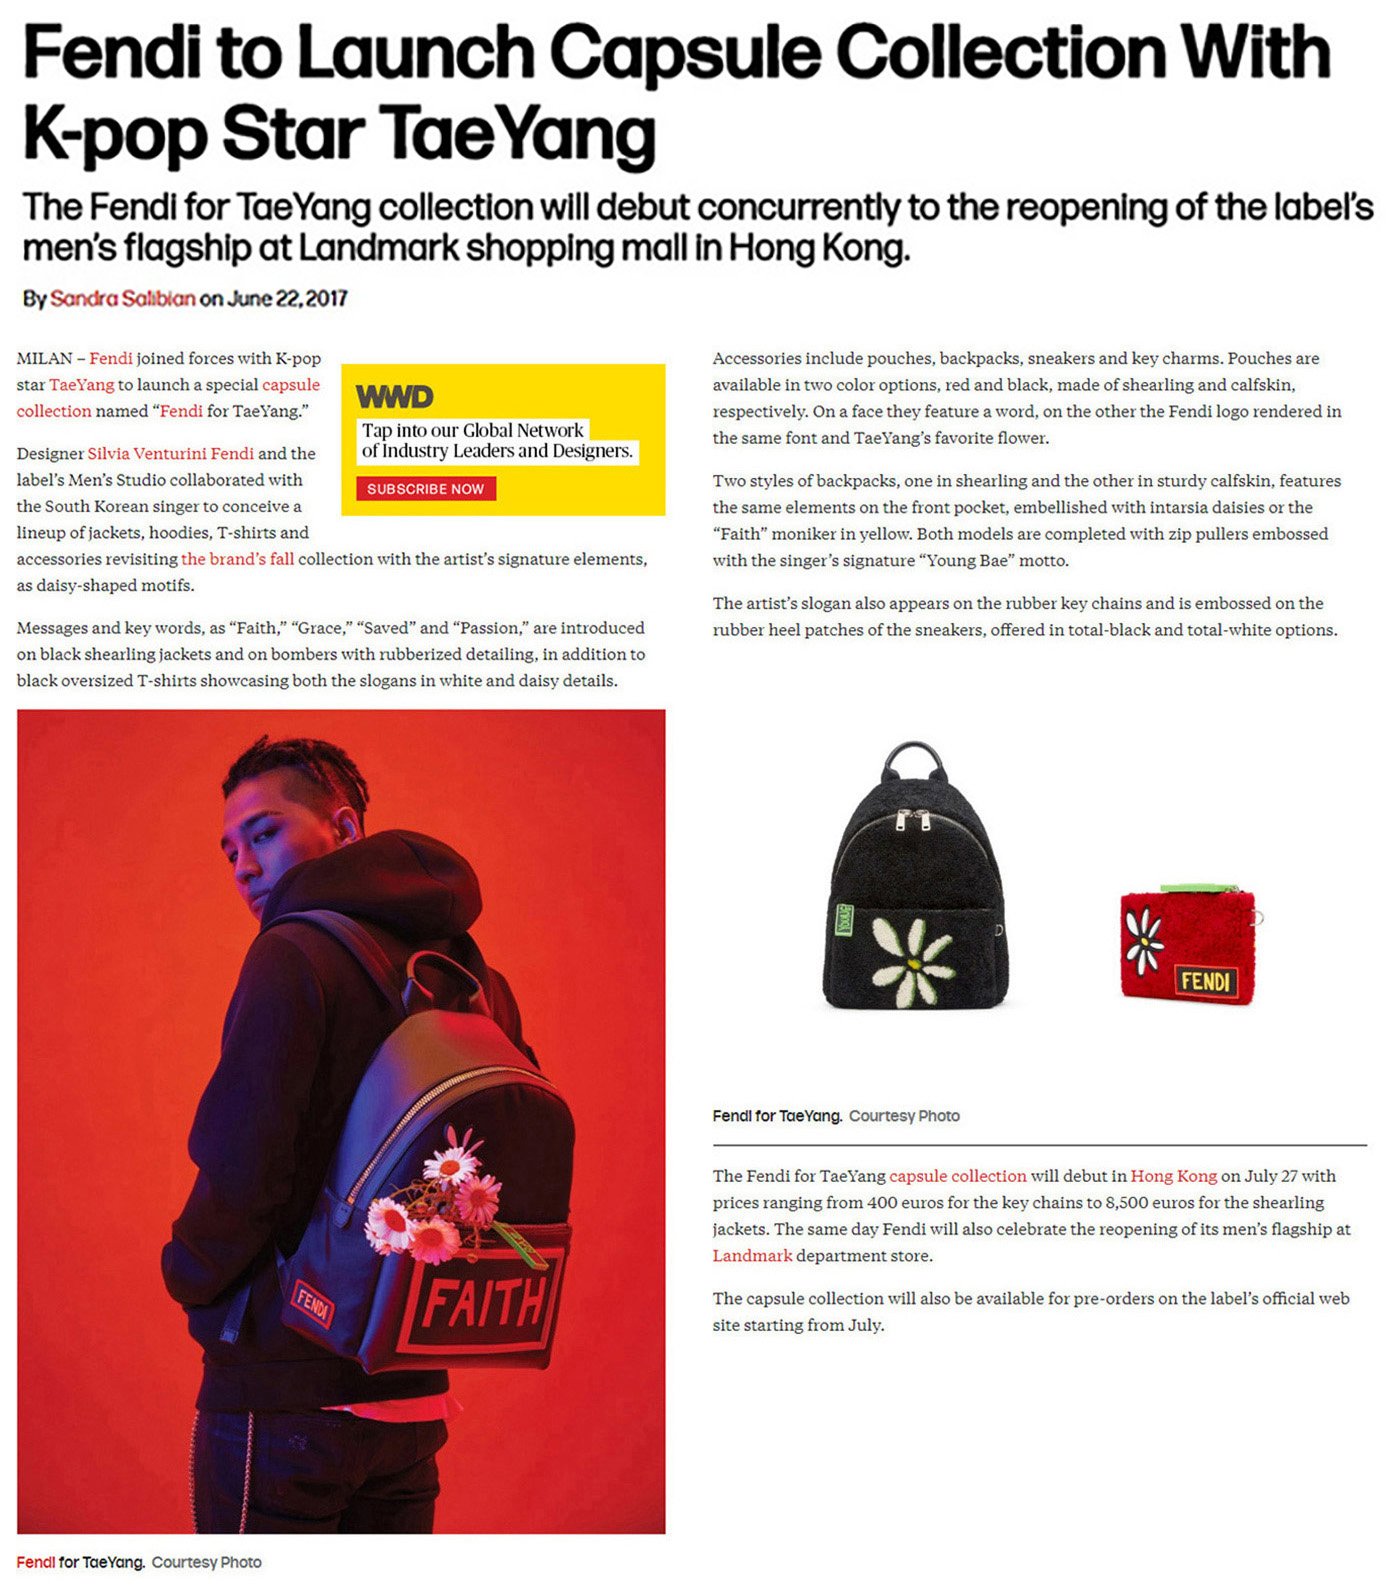 YOUAREMY Twitter: "@onebluemouse WWD) to Launch Collection With K-pop Star TaeYang👏👍👍👍😍 https://t.co/ISz797H2JT #Fendi #Bigbang https://t.co/N51G6oZSMm" / Twitter